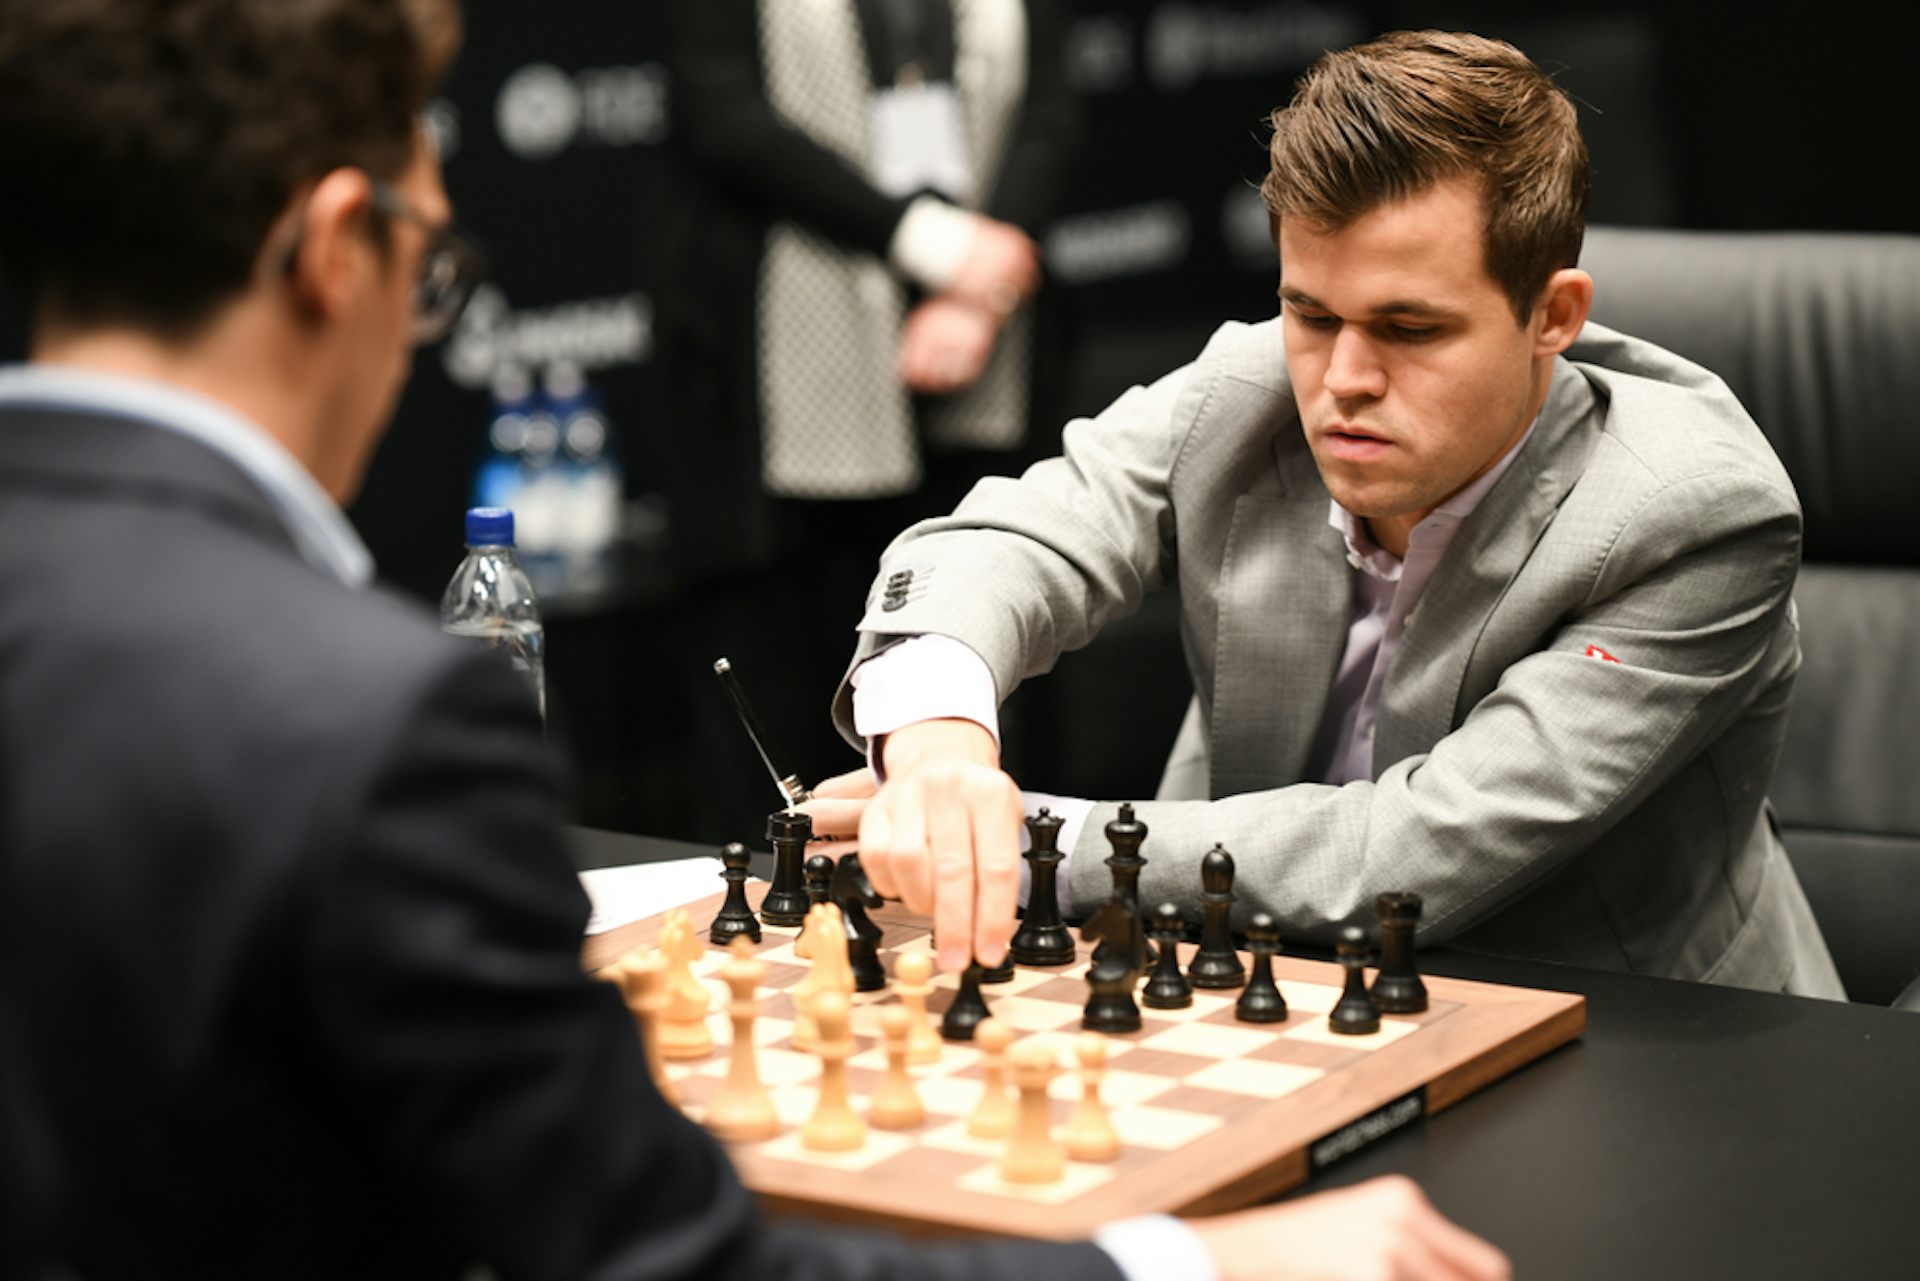 A man wearing a grey suit moves a piece on a chess board.